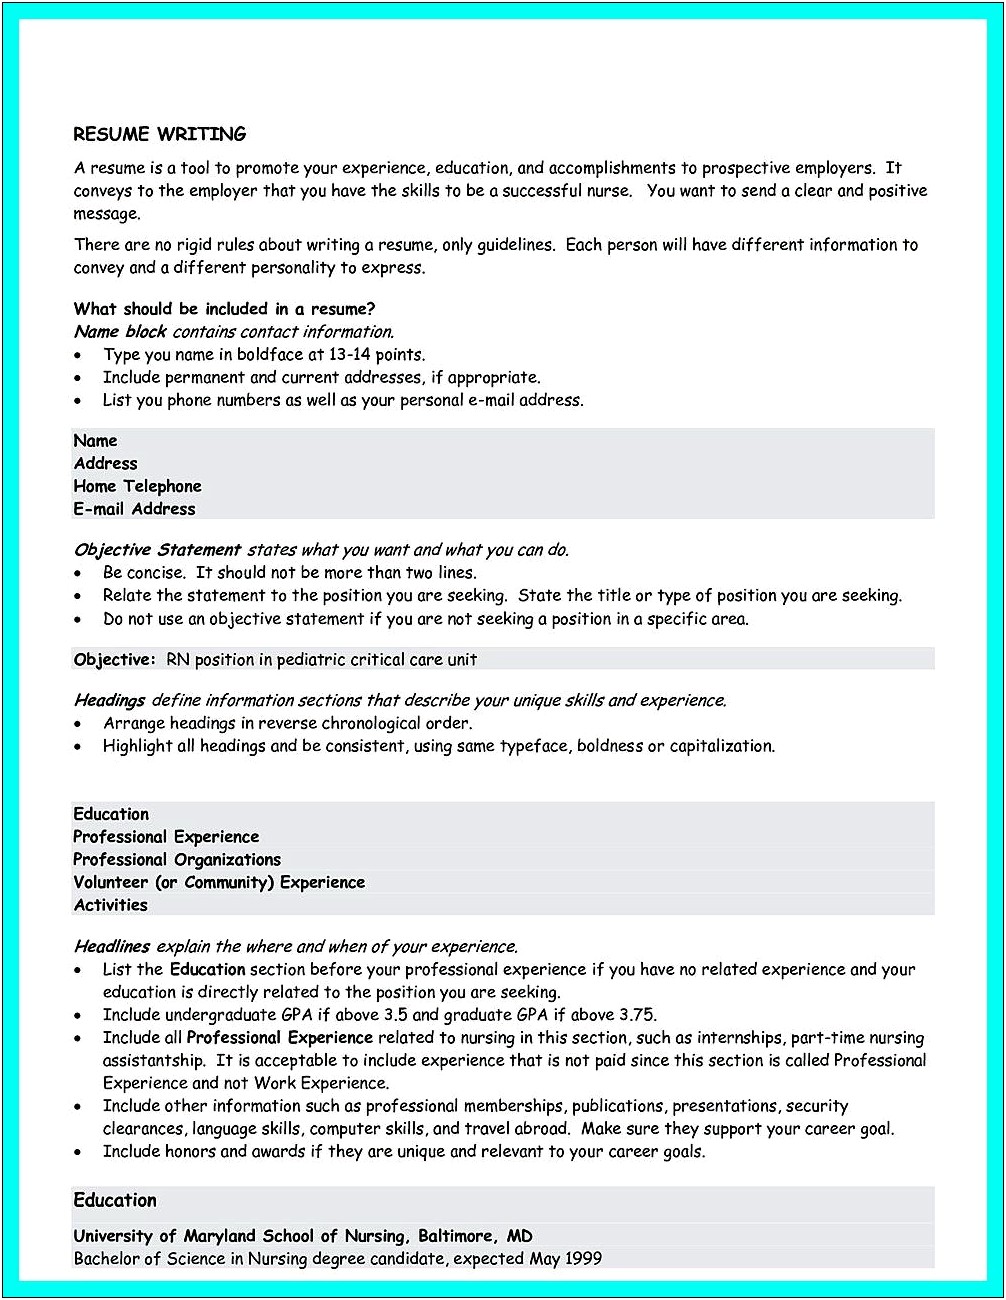 Capitlizing Areas Of Experience In A Resume